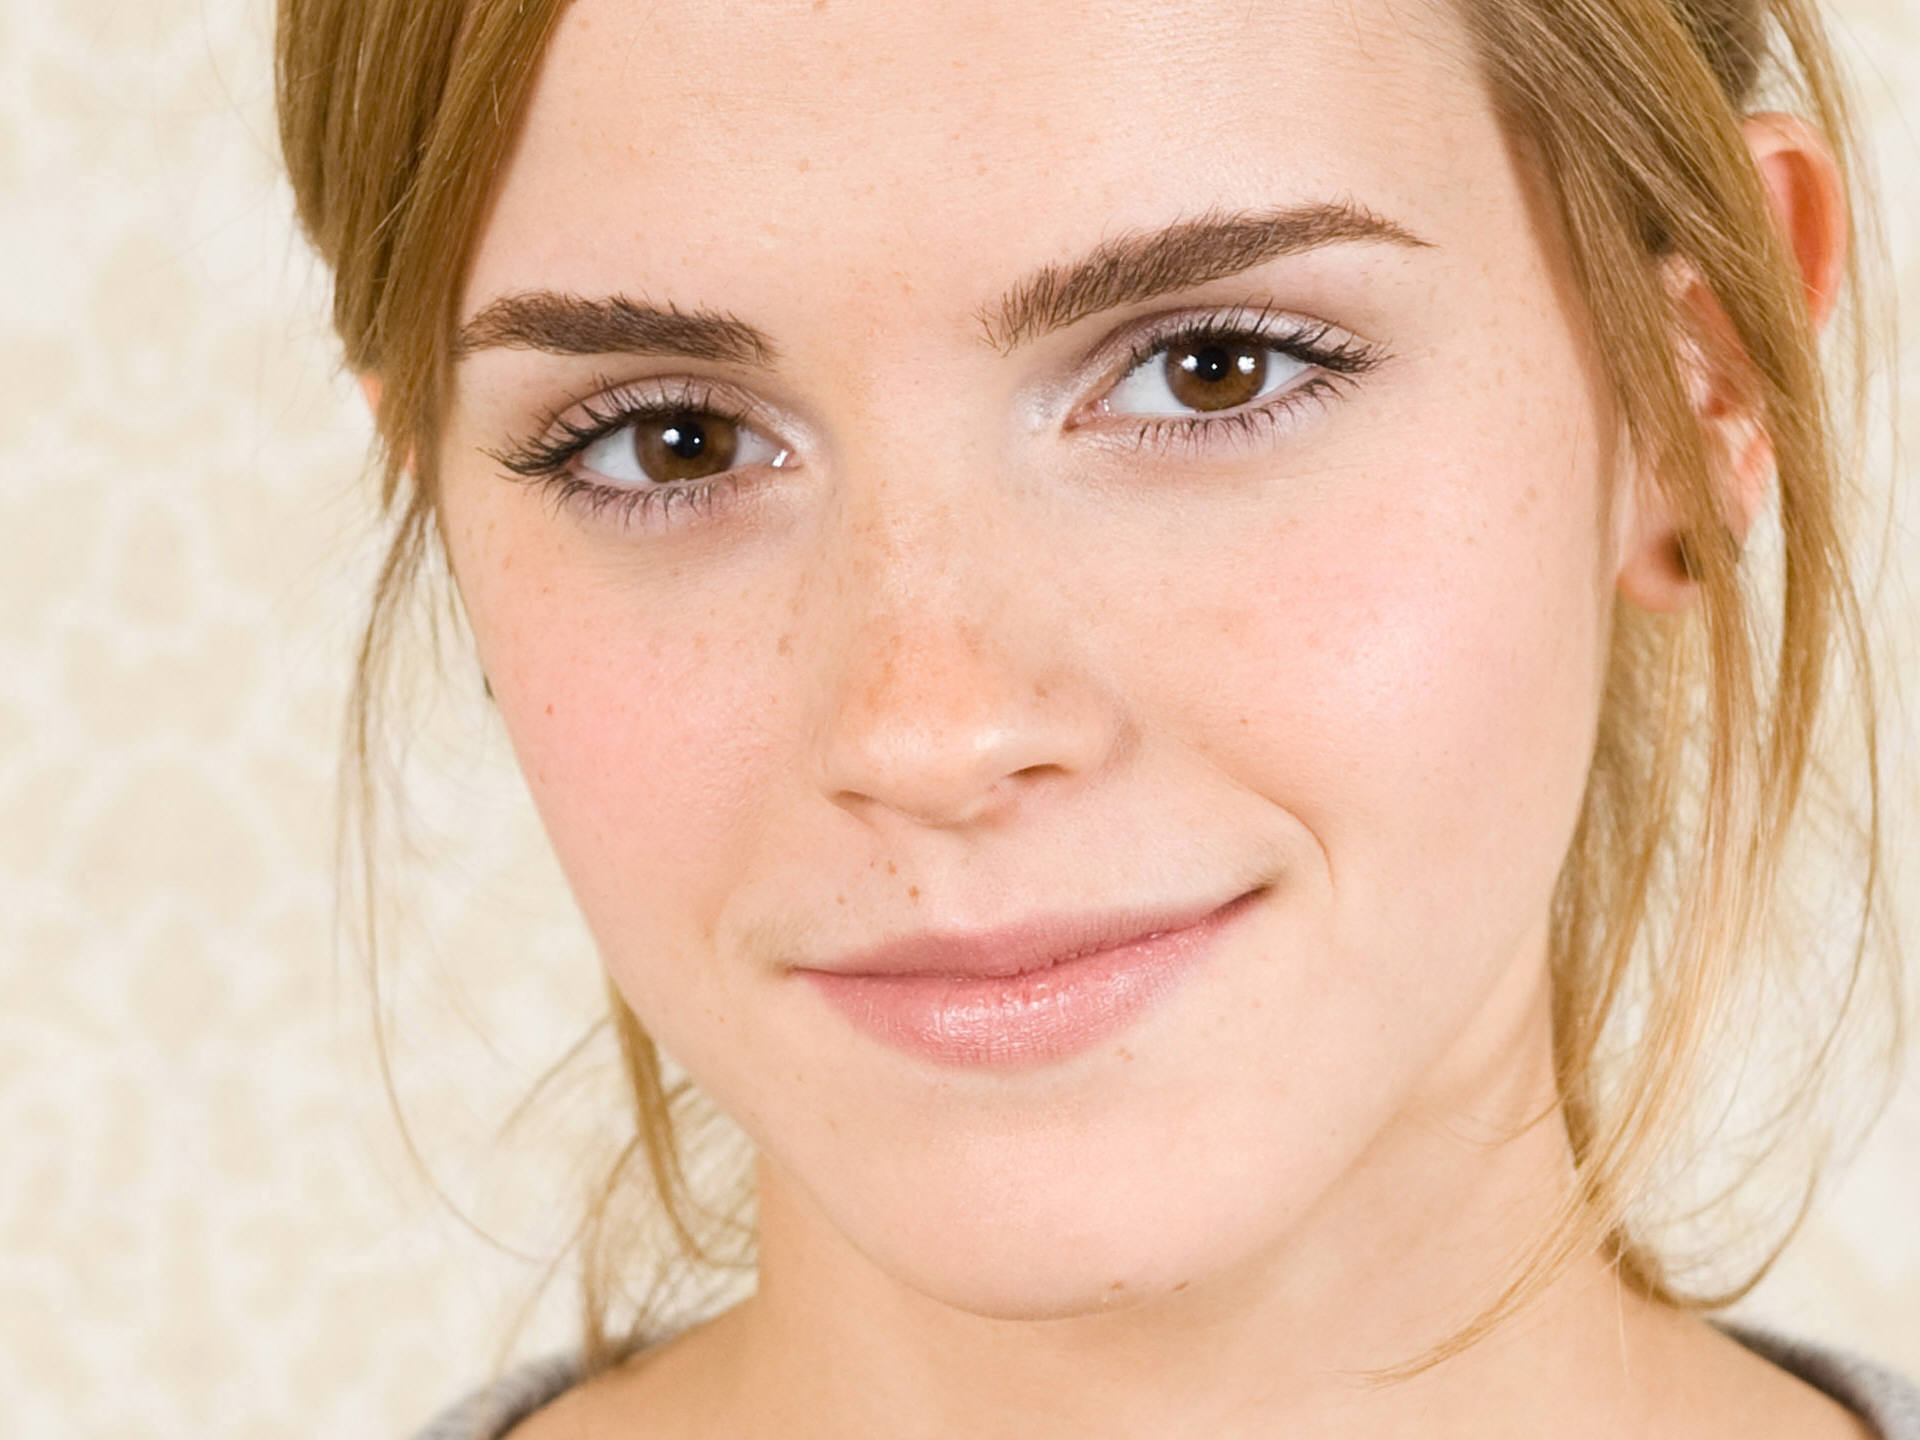 Emma Watson Sexy Smile 2014 Wallpaper Hd Celebrities 4k Wallpapers Images And Background